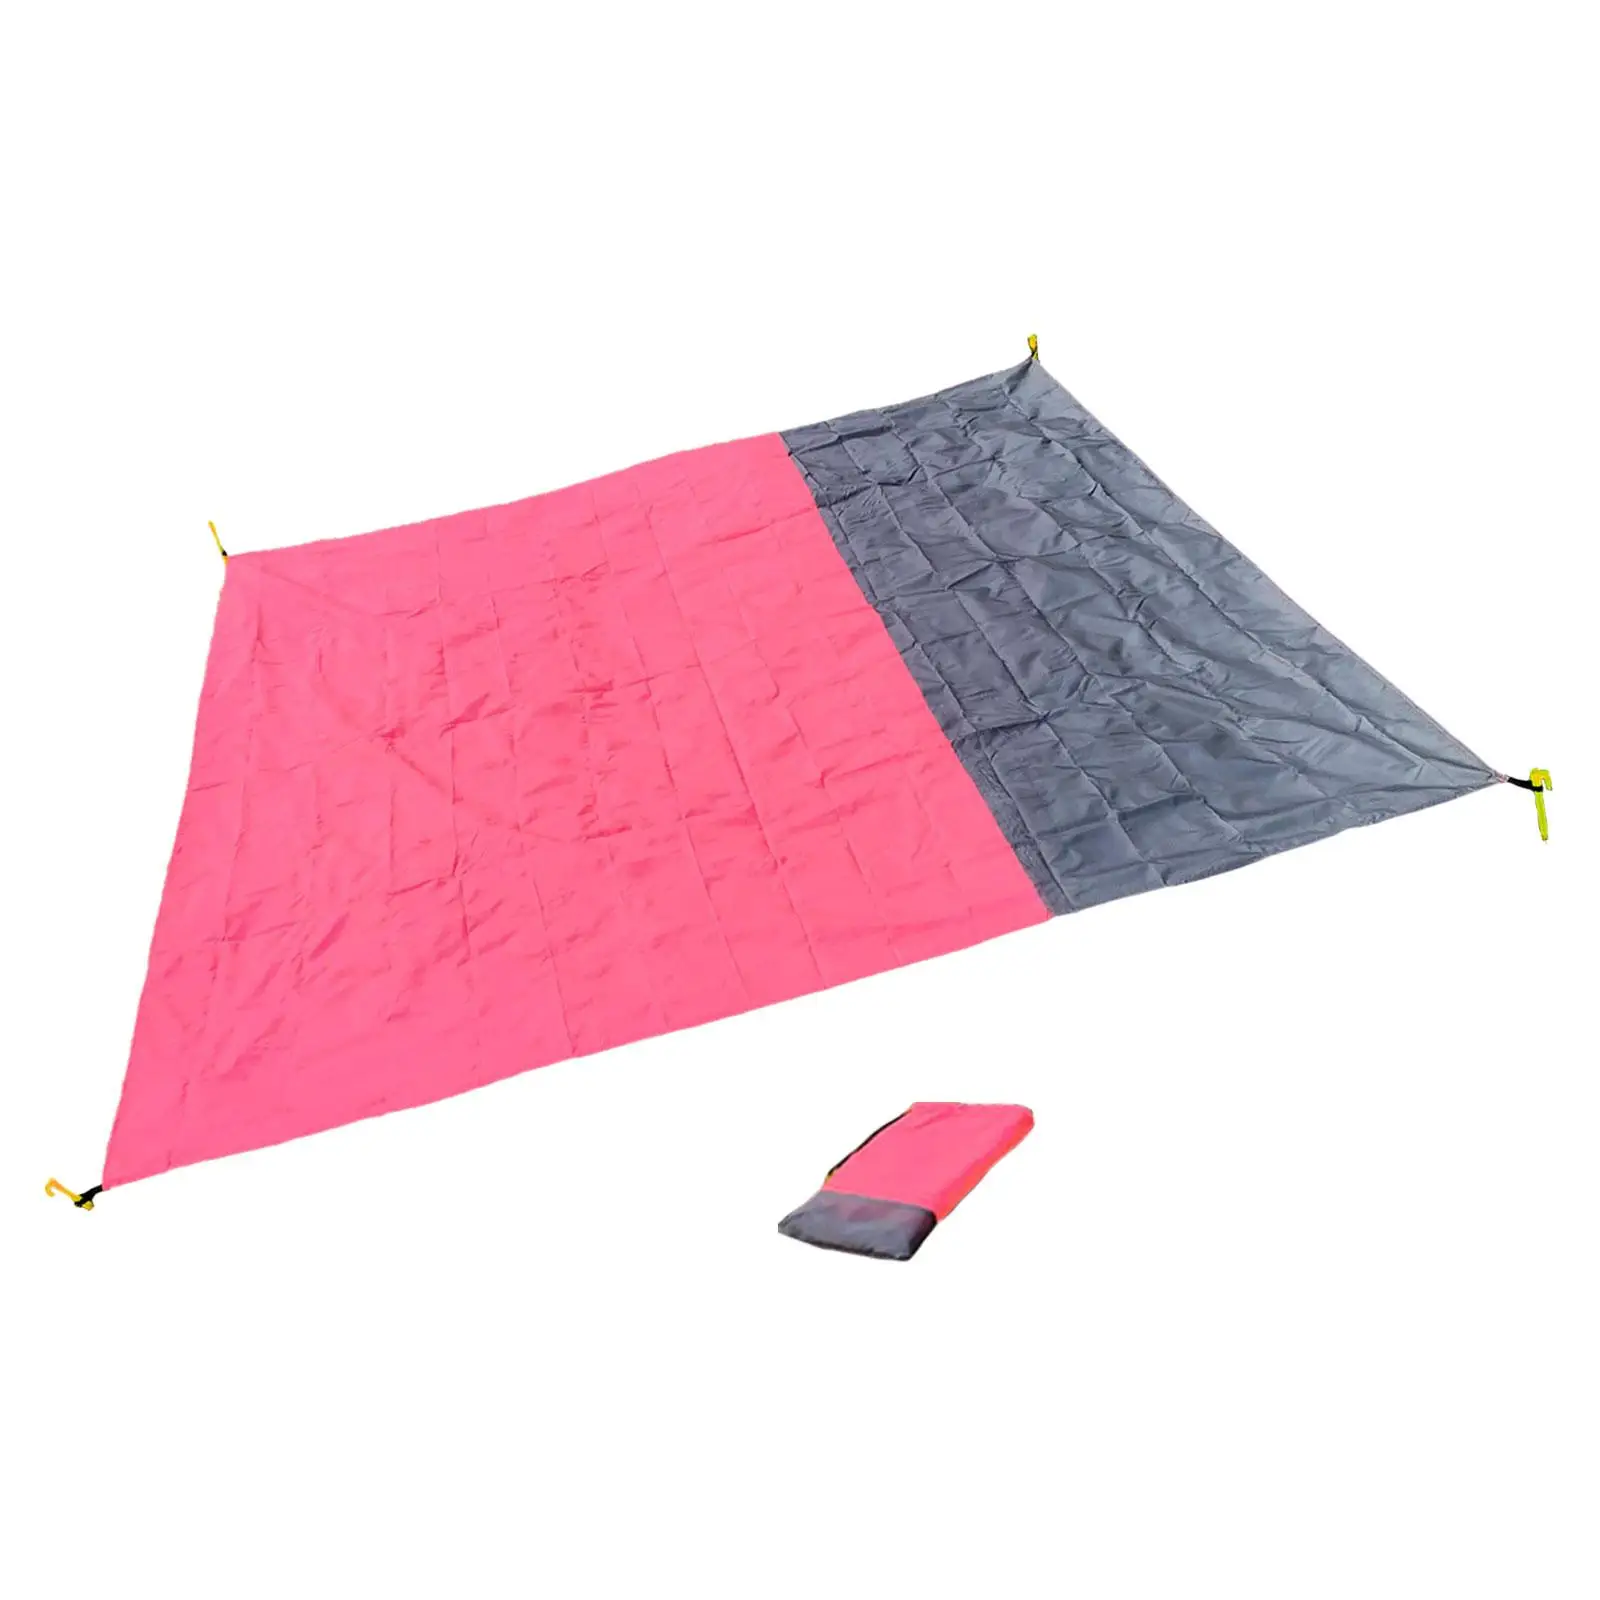 Picnic Blanket Outdoor Mat Folding Compact Beach Mat Accessory Camping Mat for Park Travel Backpacking Sports Music Festival